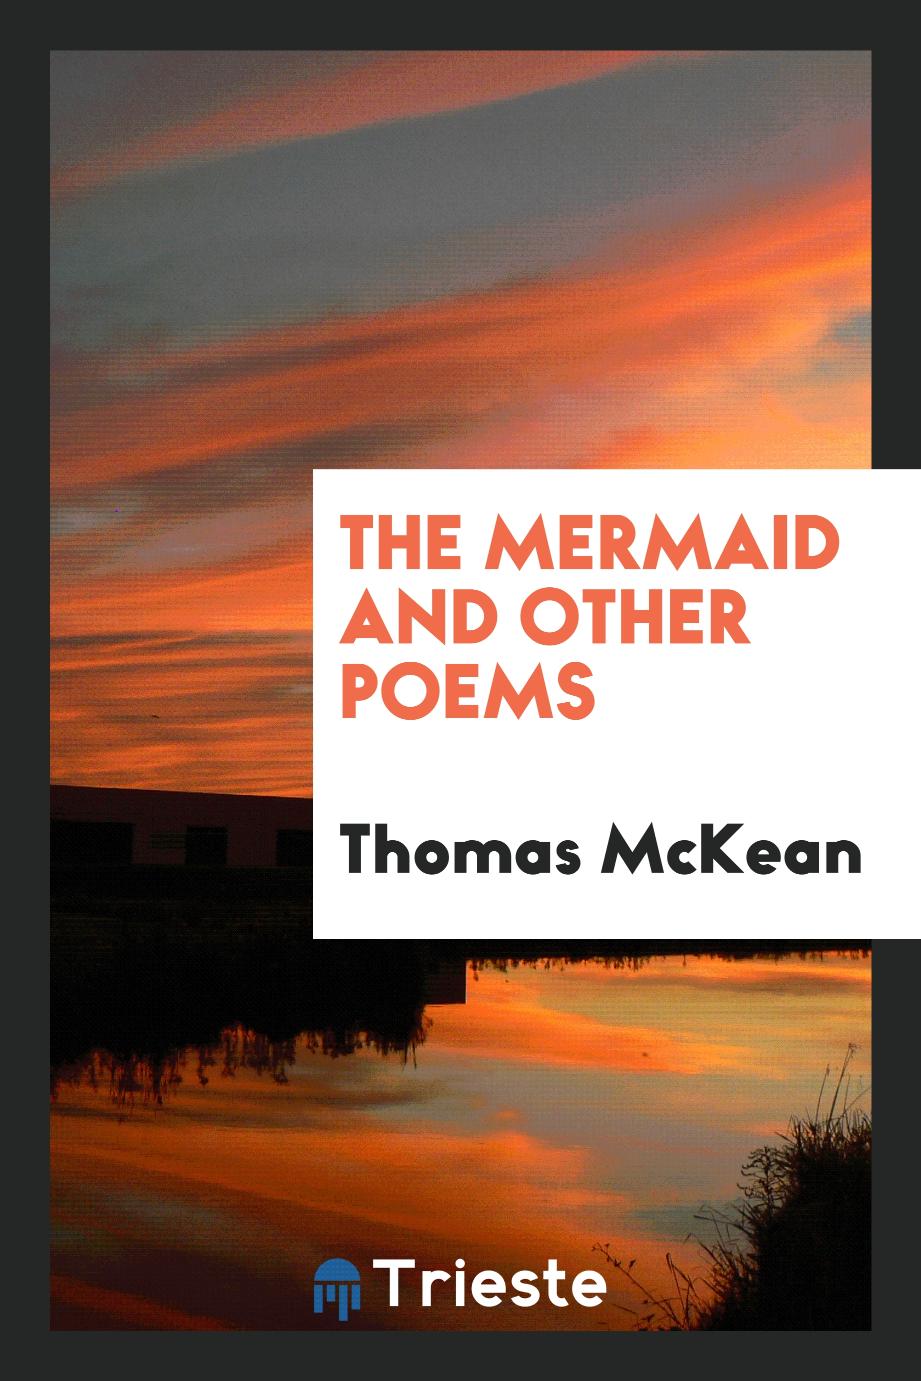 The Mermaid and Other Poems